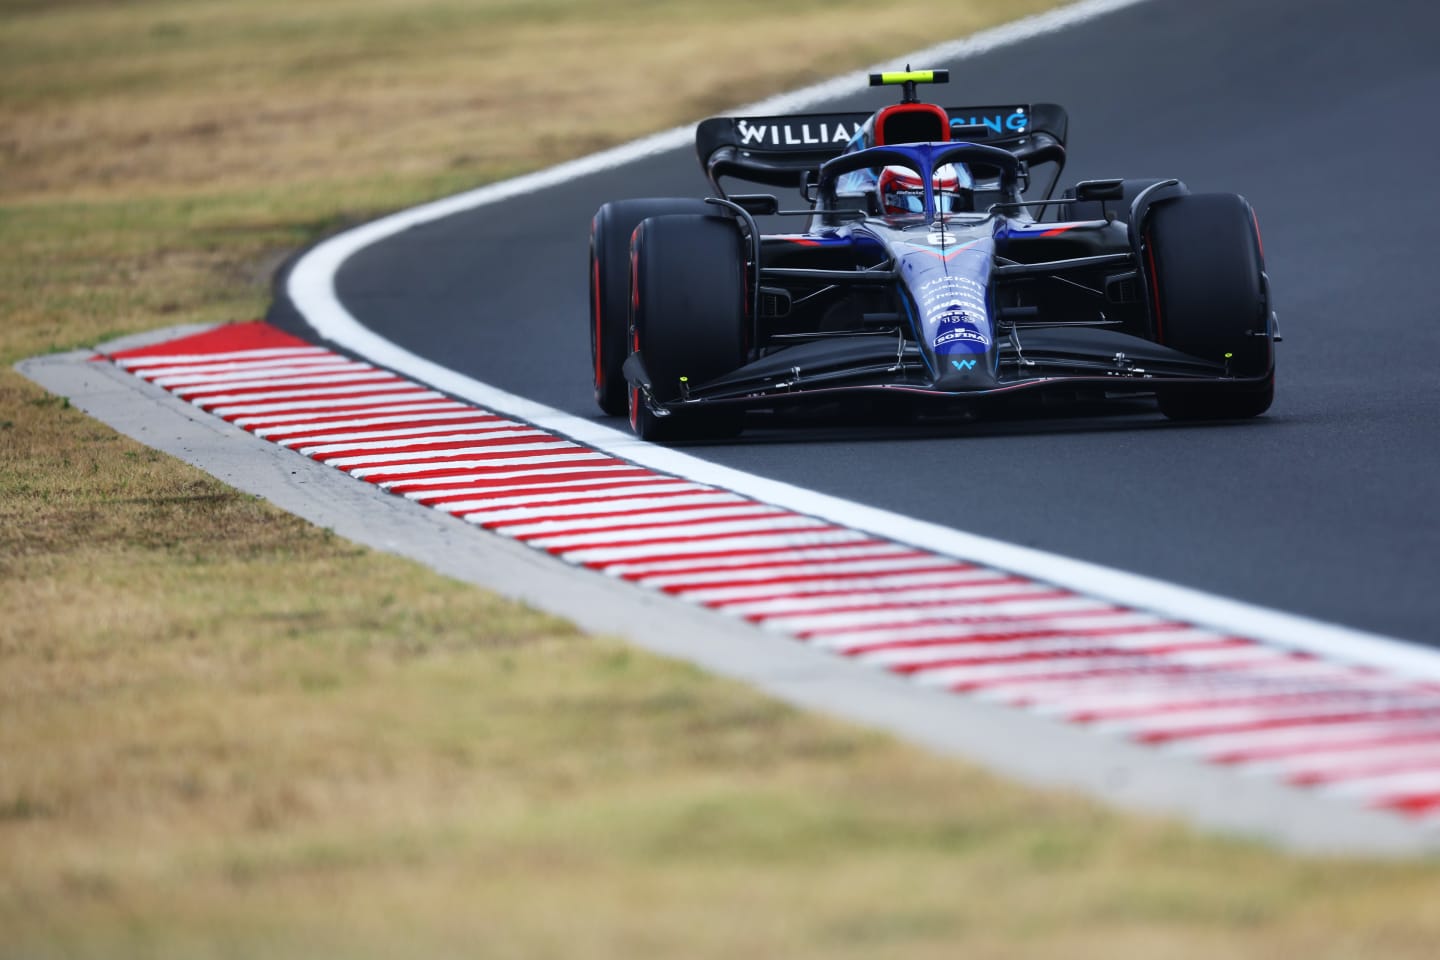 BUDAPEST, HUNGARY - JULY 31: Nicholas Latifi of Canada driving the (6) Williams FW44 Mercedes on track during the F1 Grand Prix of Hungary at Hungaroring on July 31, 2022 in Budapest, Hungary. (Photo by Francois Nel/Getty Images)